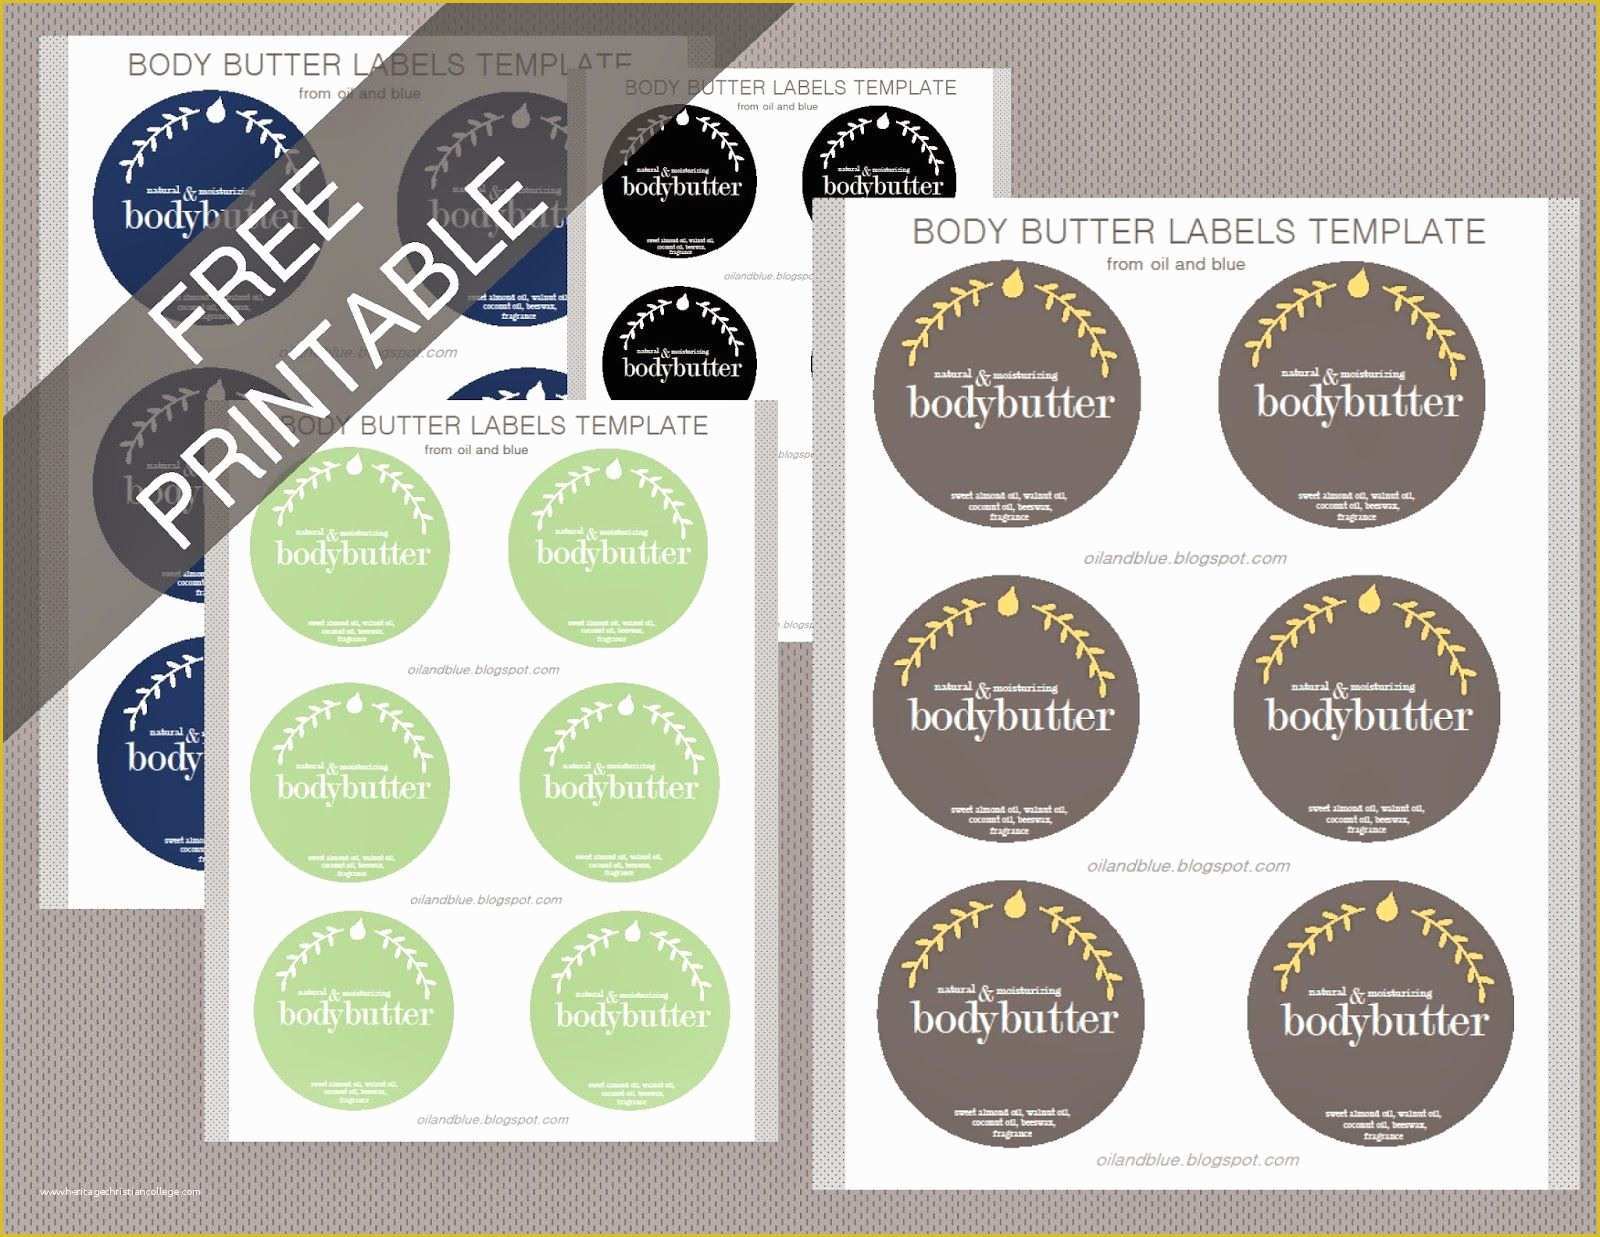 Free Diy Website Templates Of Free Printable Labels for Diy Perfumed Body butter You